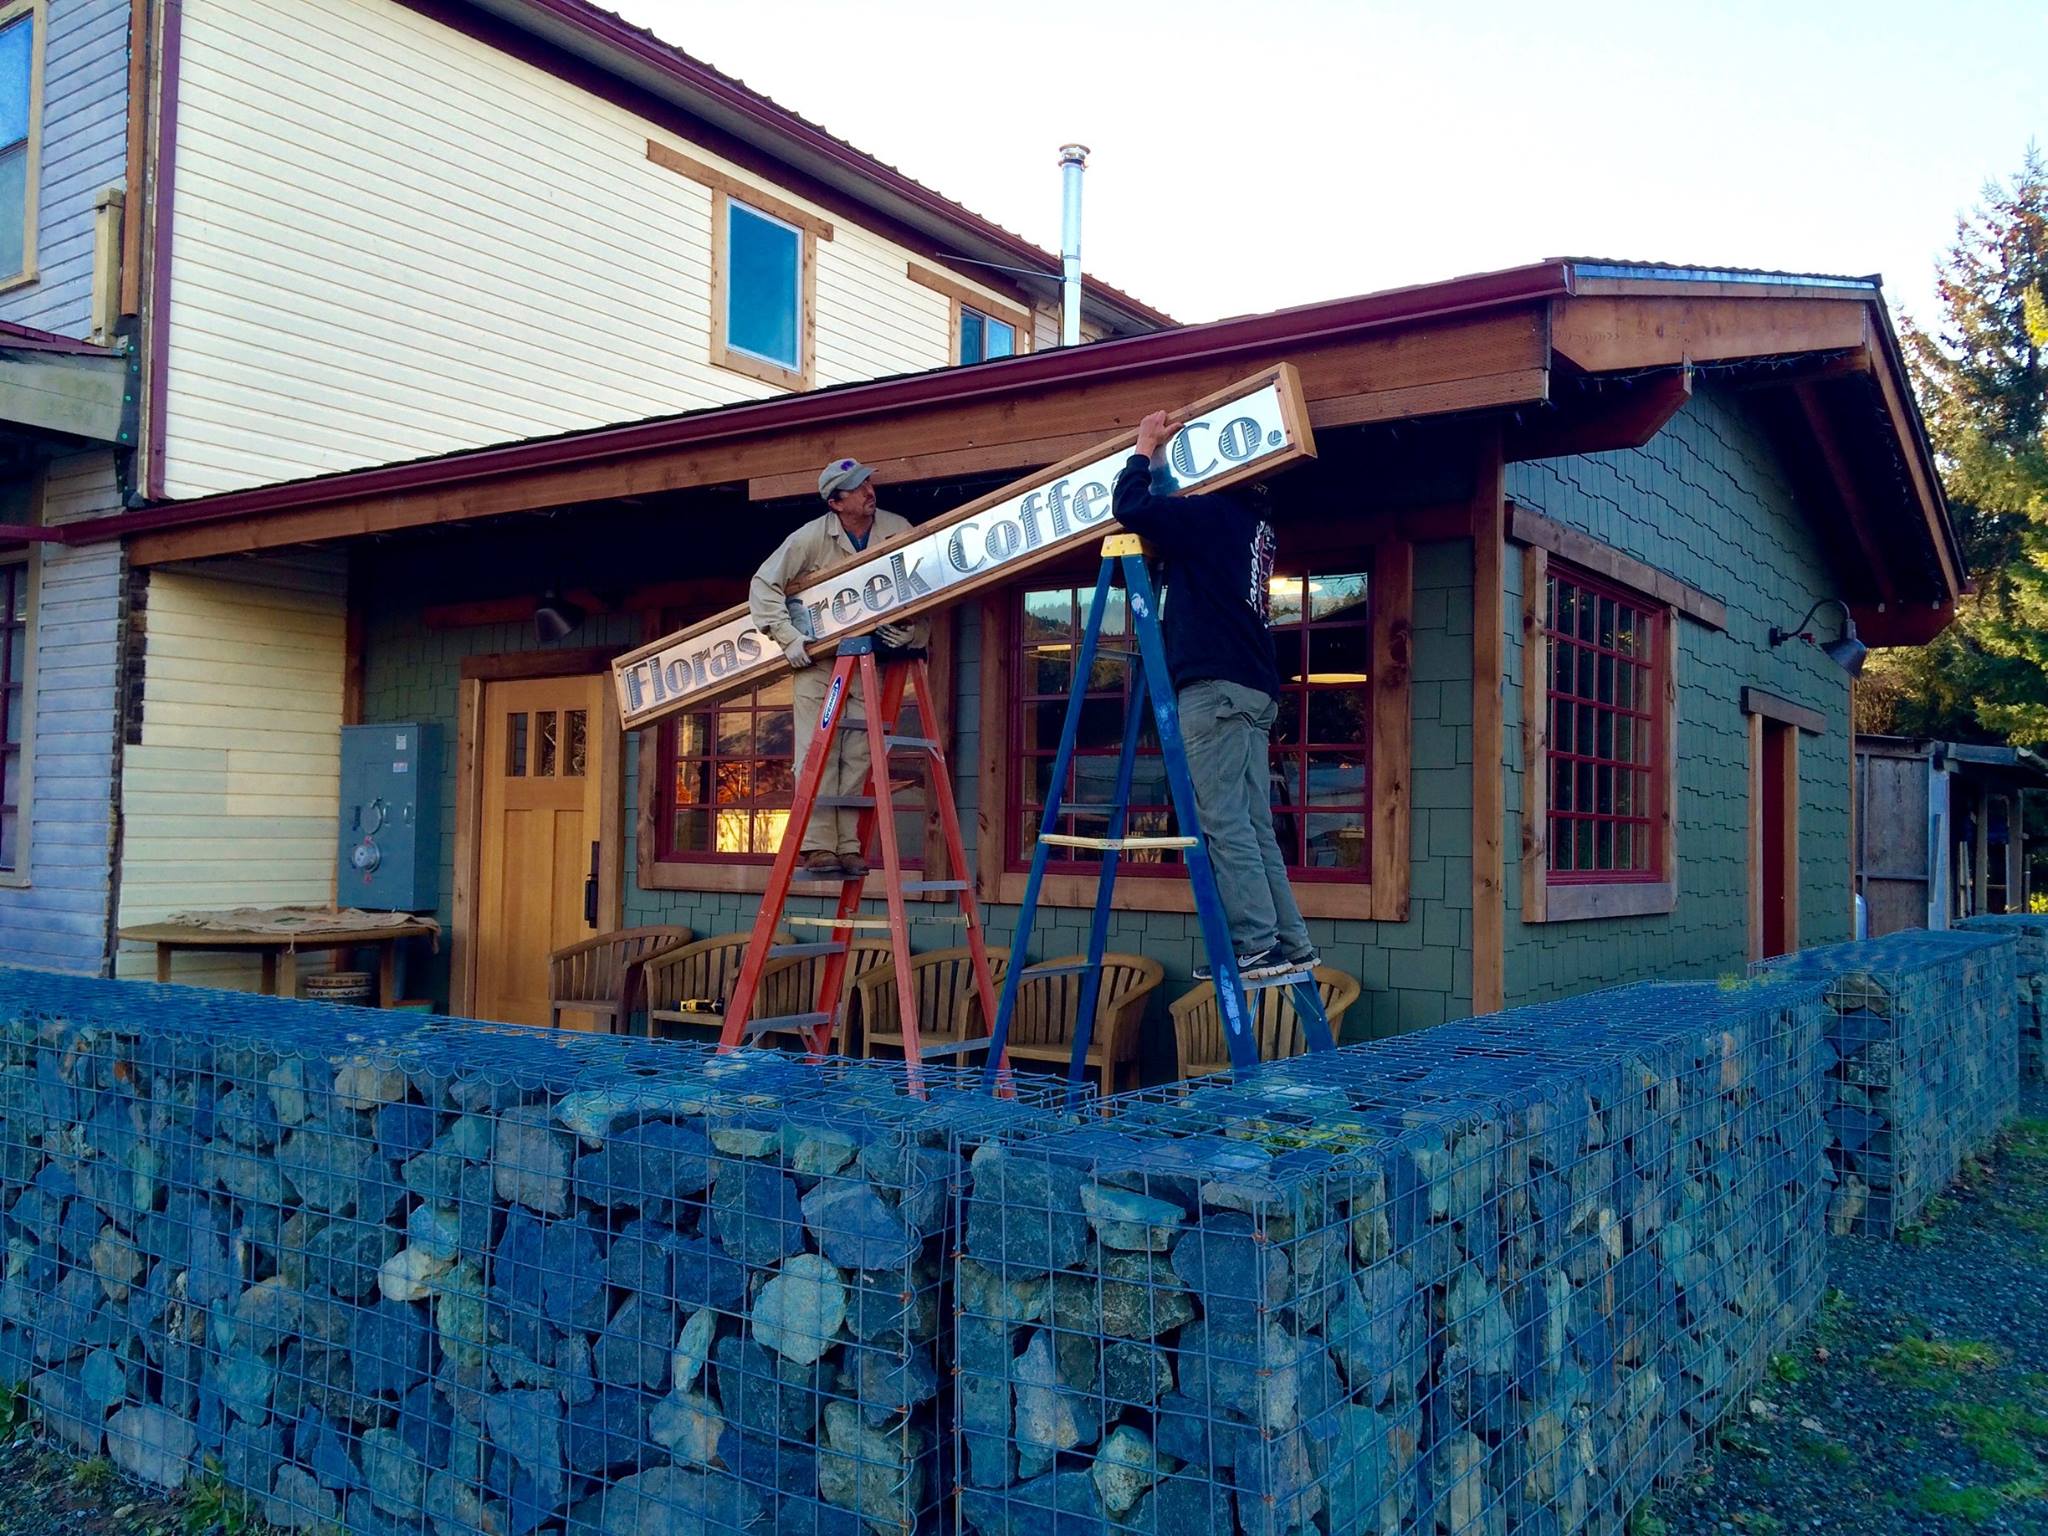 New sign being installed at Floras Creek Coffee in Langlois, Oregon